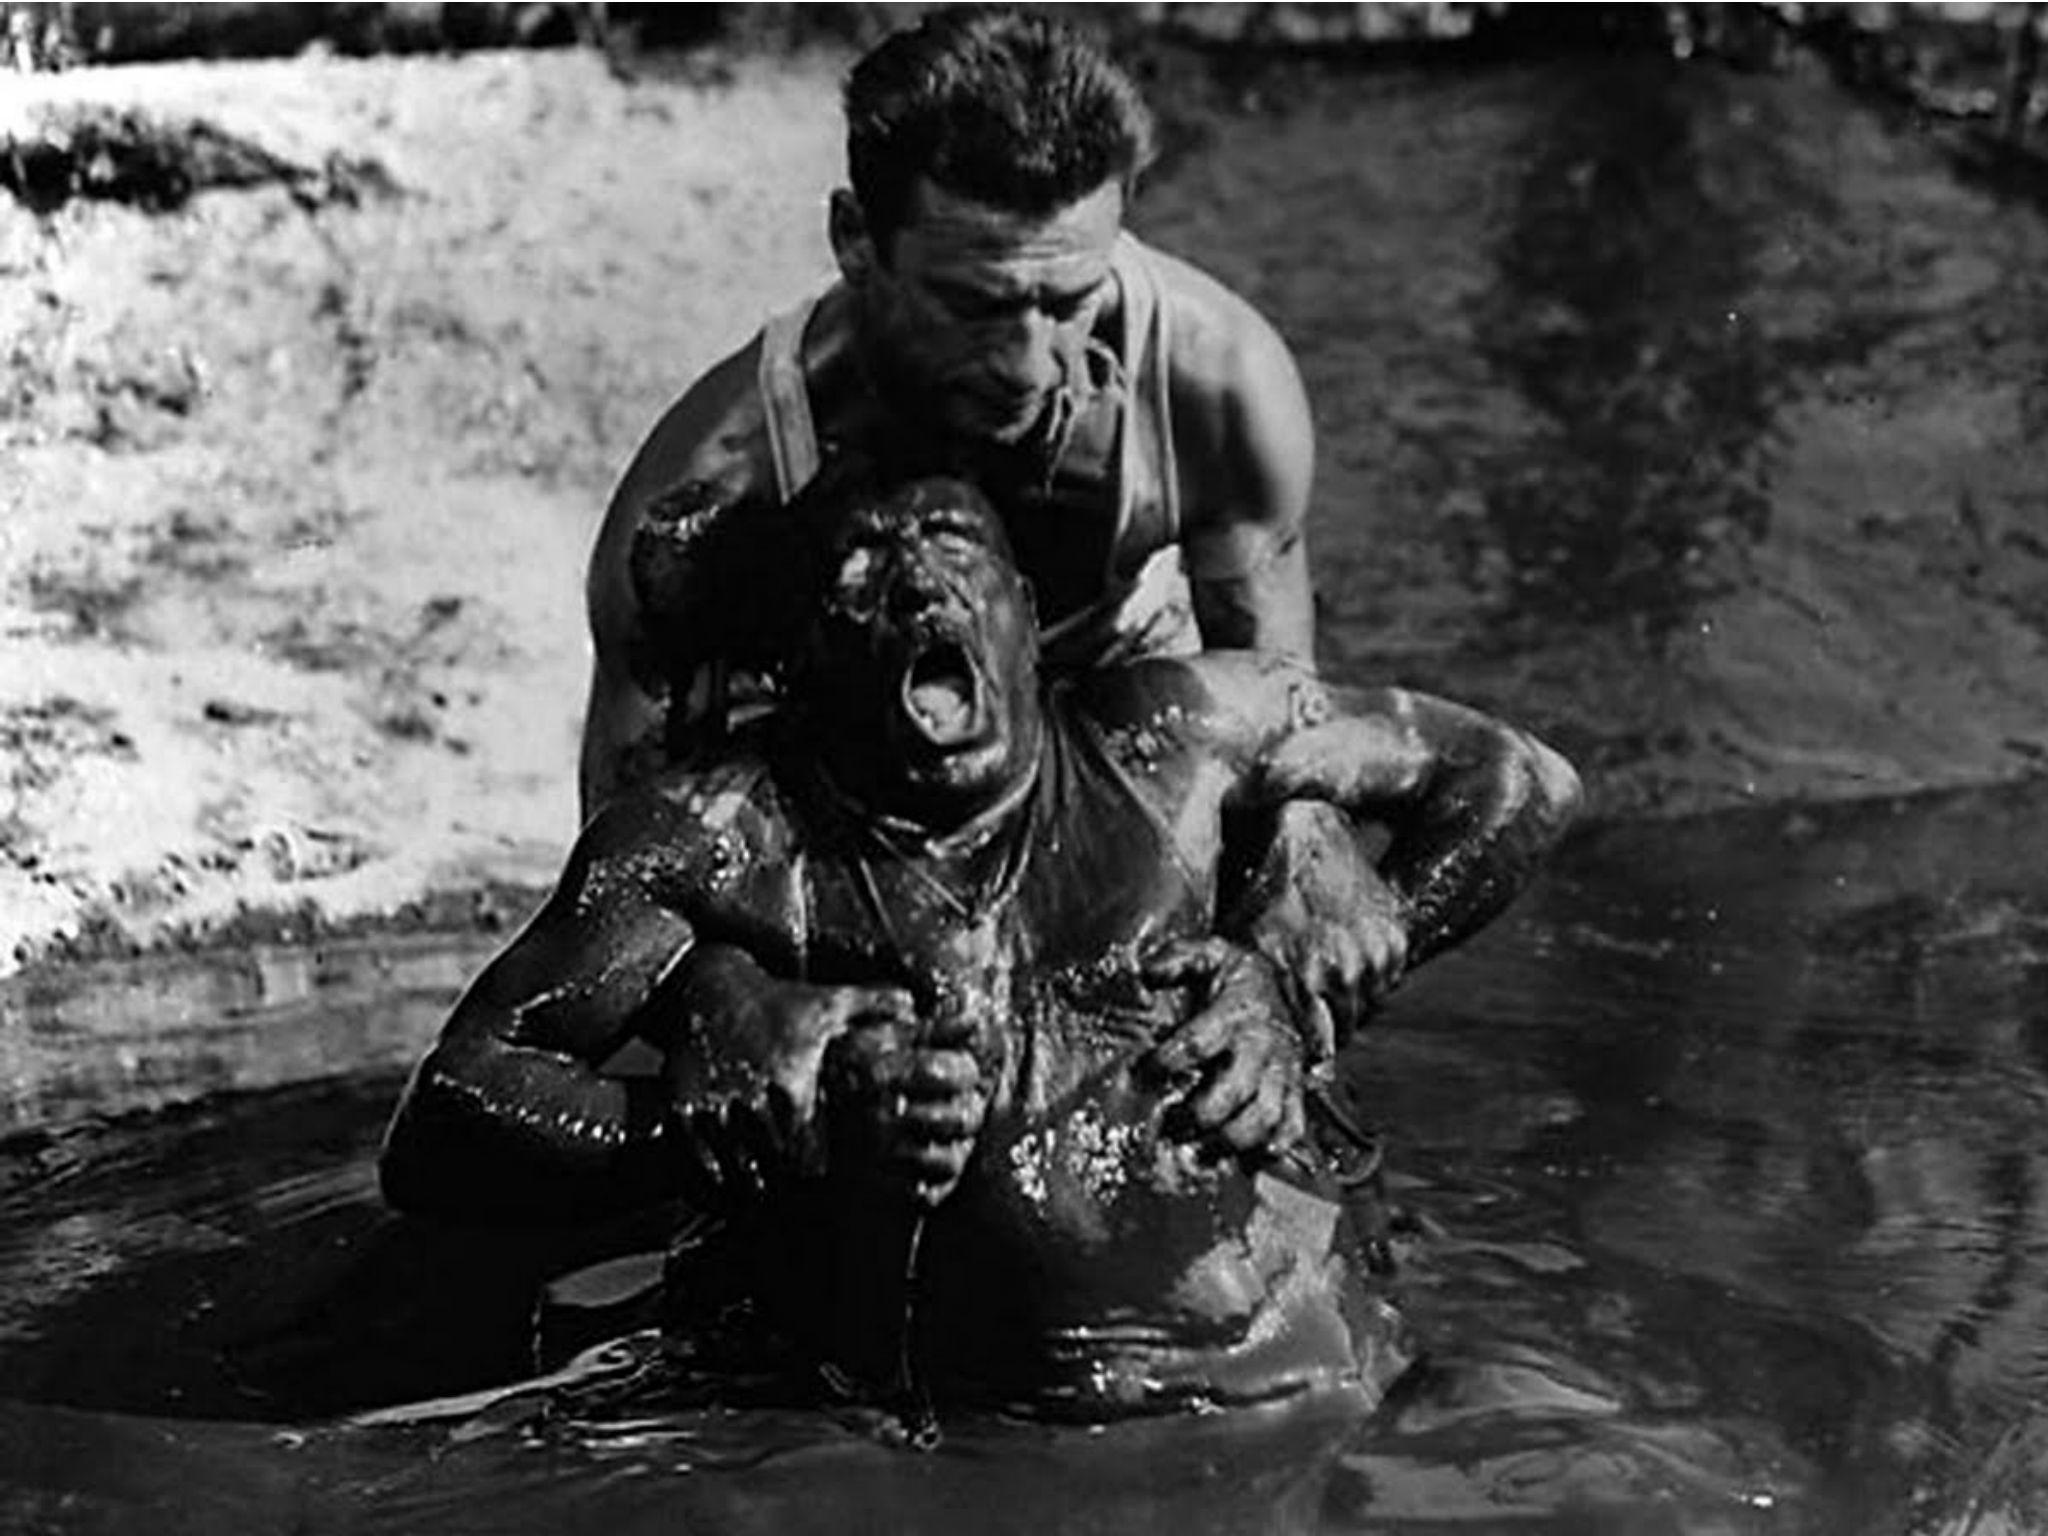 Yves Montand as Mario and Charles Vanel as M. Jo in Henri-Georges Clouzot's 'The Wages of Fear'